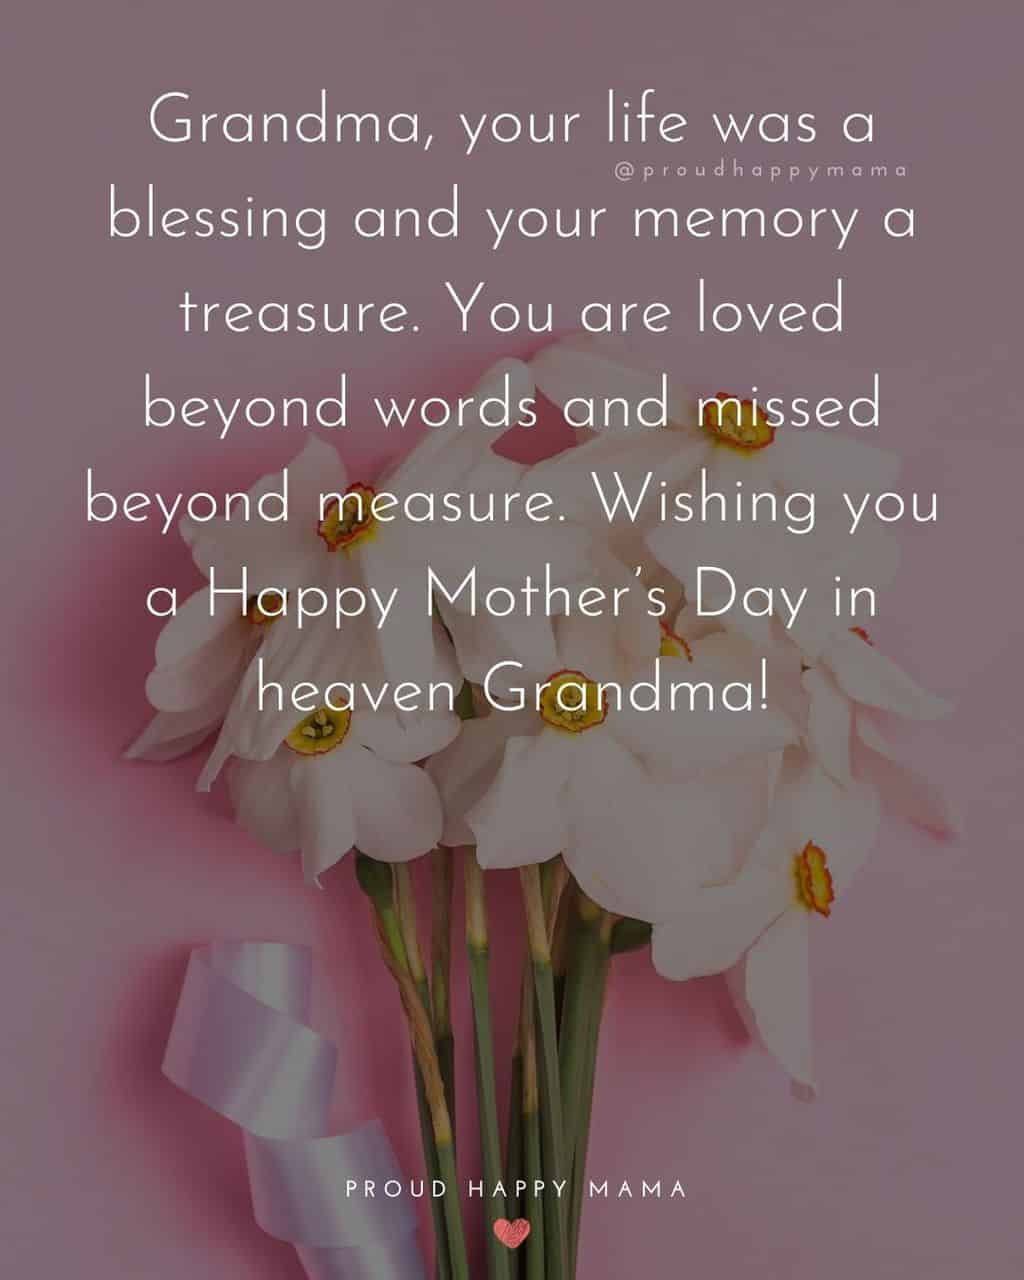 Happy Mothers Day Quotes To Grandma - Grandma, your life was a blessing and your memory a treasure. You are loved